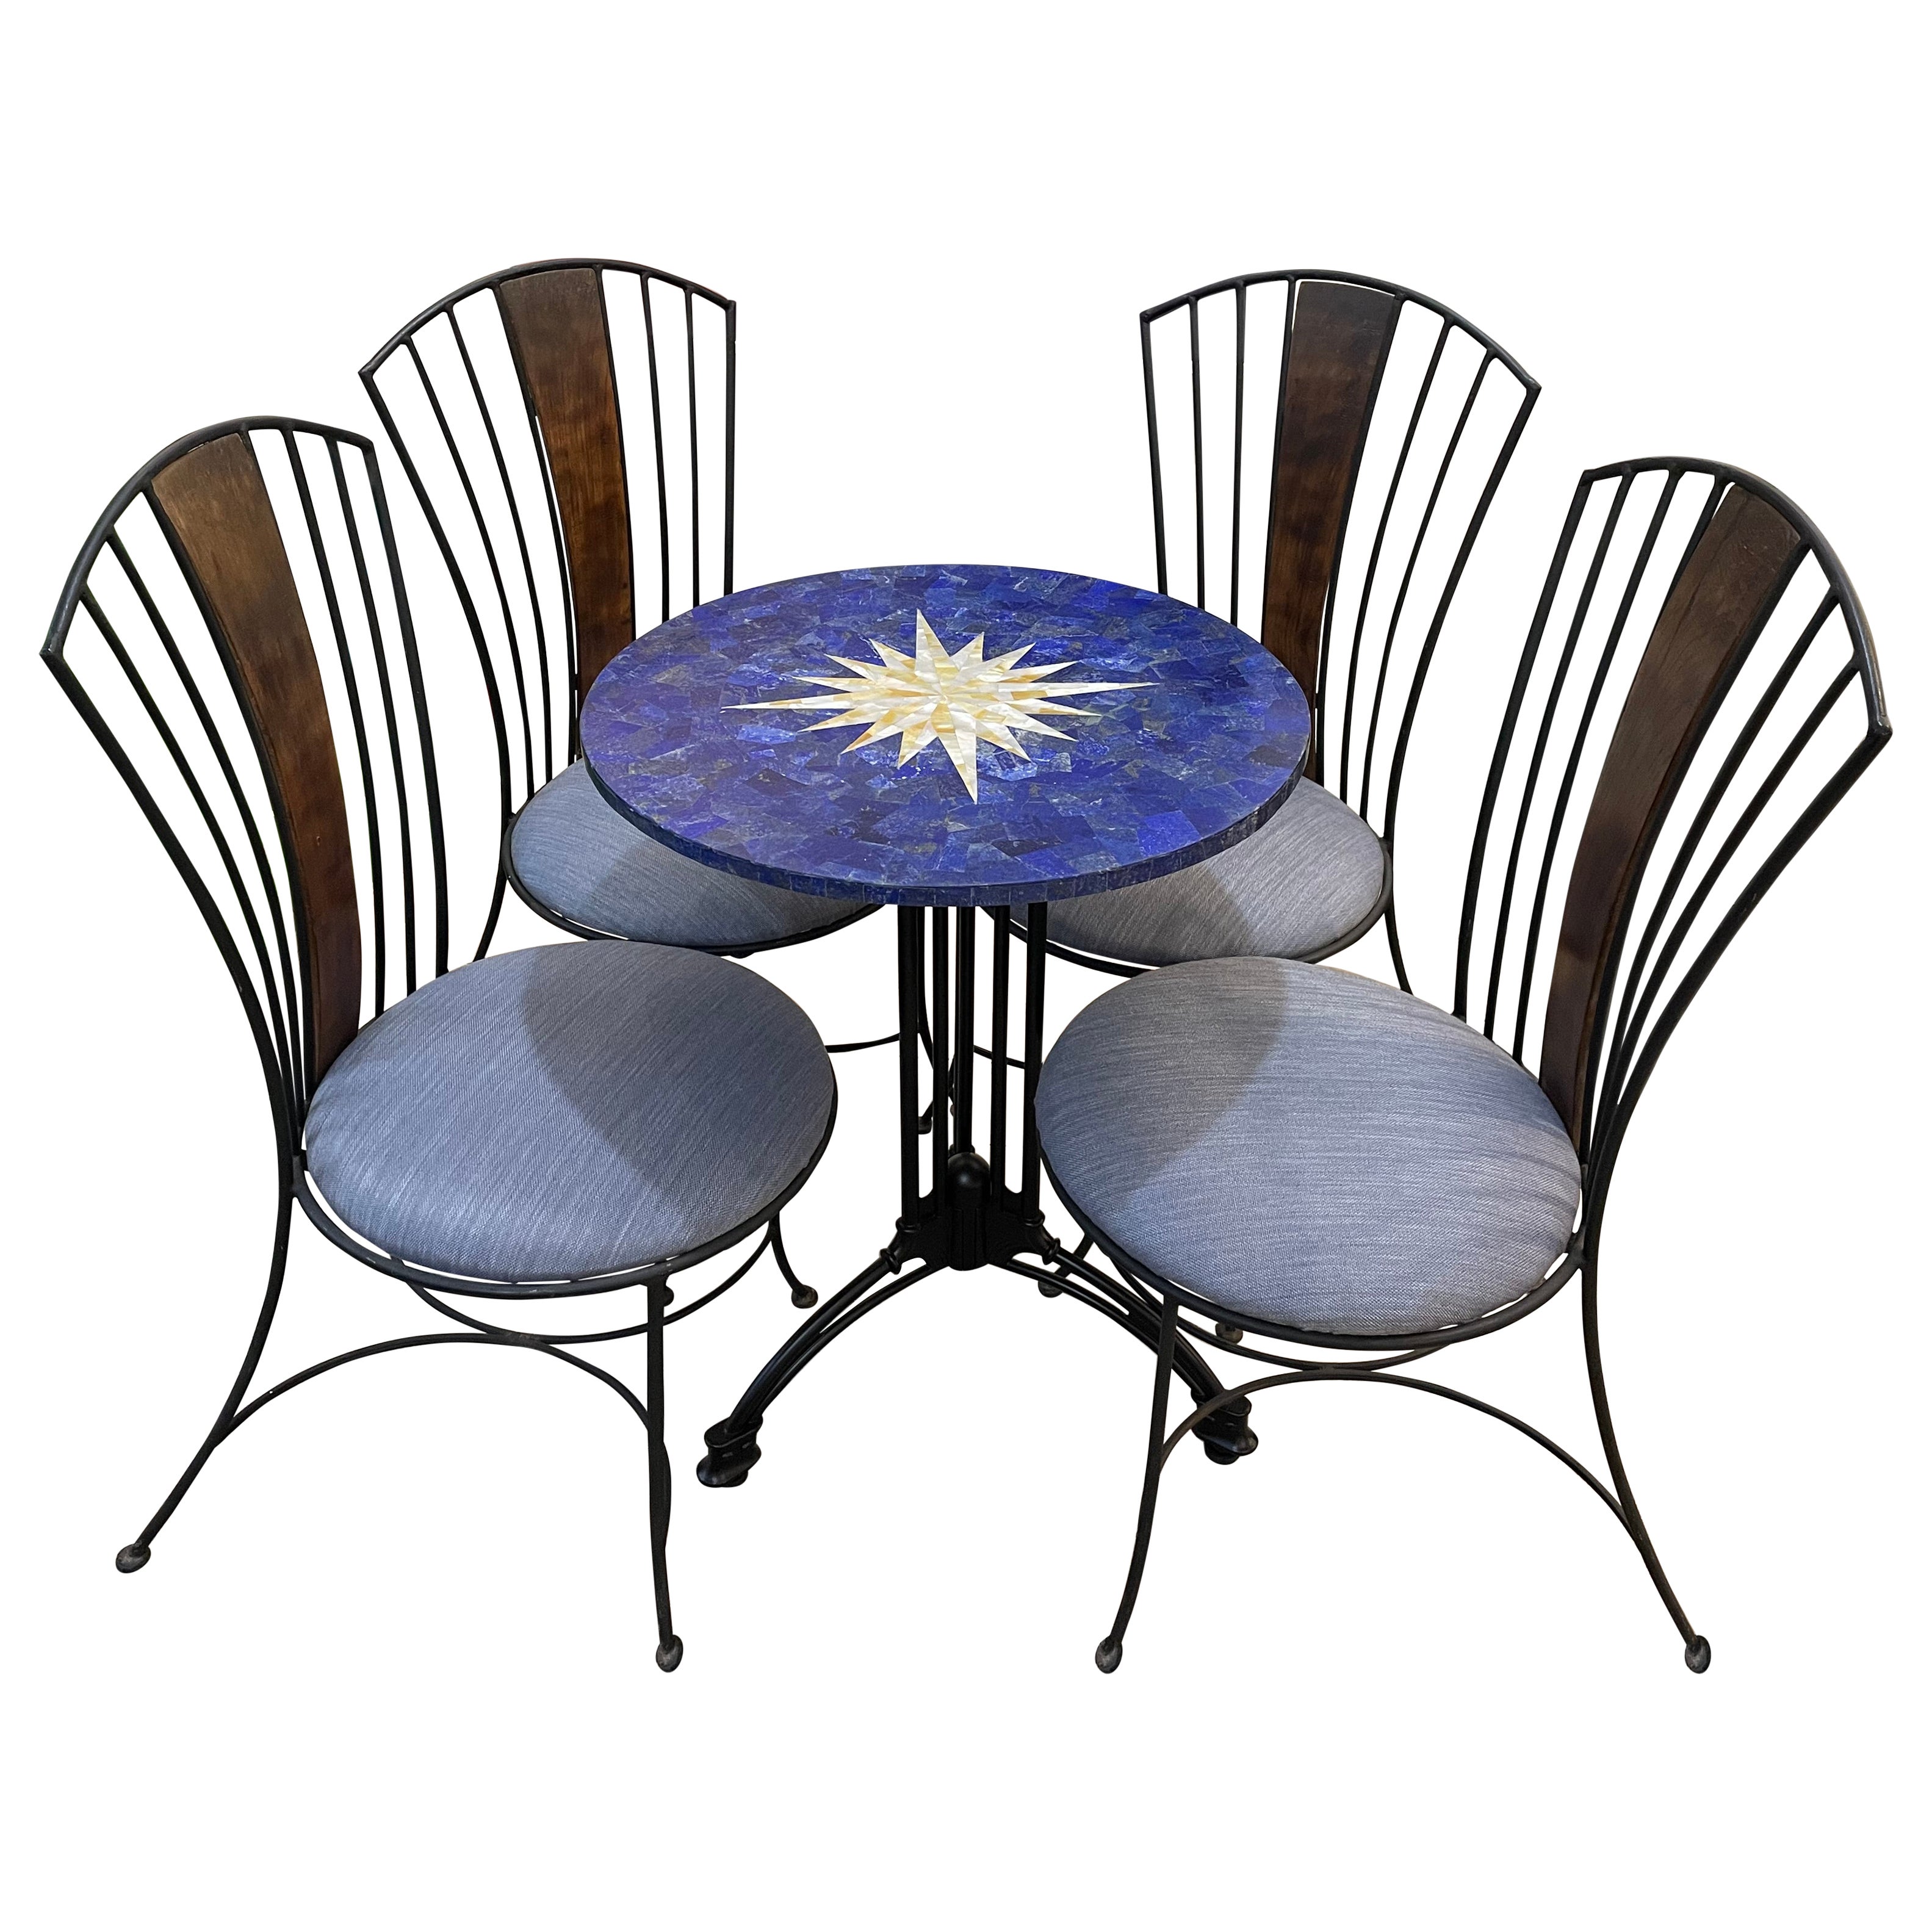 Lapis and Mother of Pearl Pietra Dura Cafe Table and Four Iron Chairs w/ Cushion For Sale